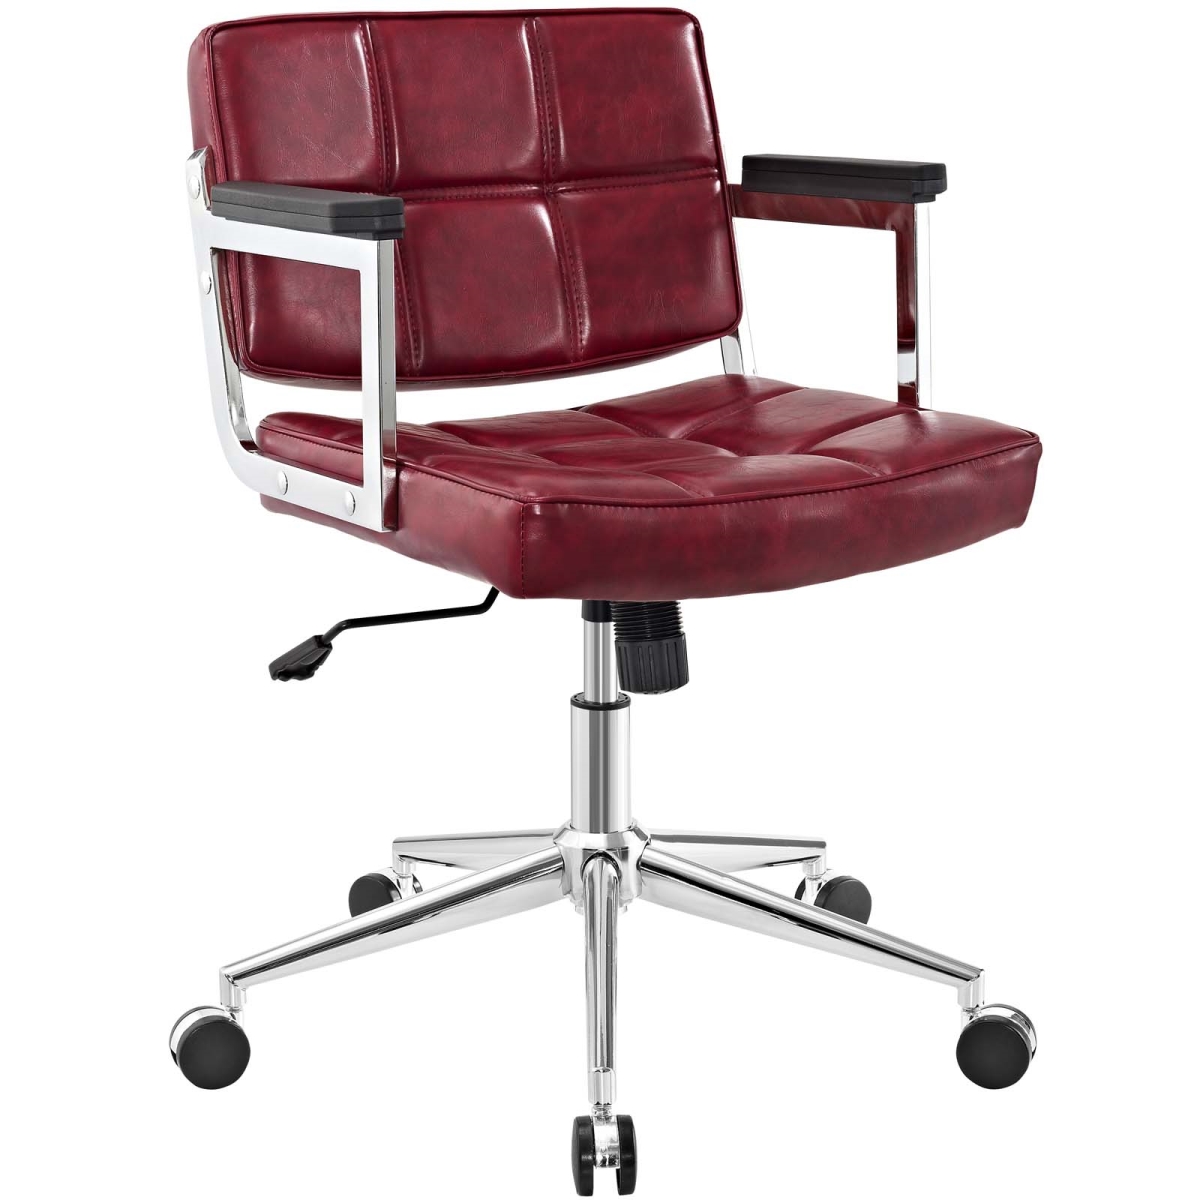 Modway Eei-2686-red 37 - 39.5 H X 26 W X 25 L In. Portray Mid Back Upholstered Vinyl Office Chair, Red